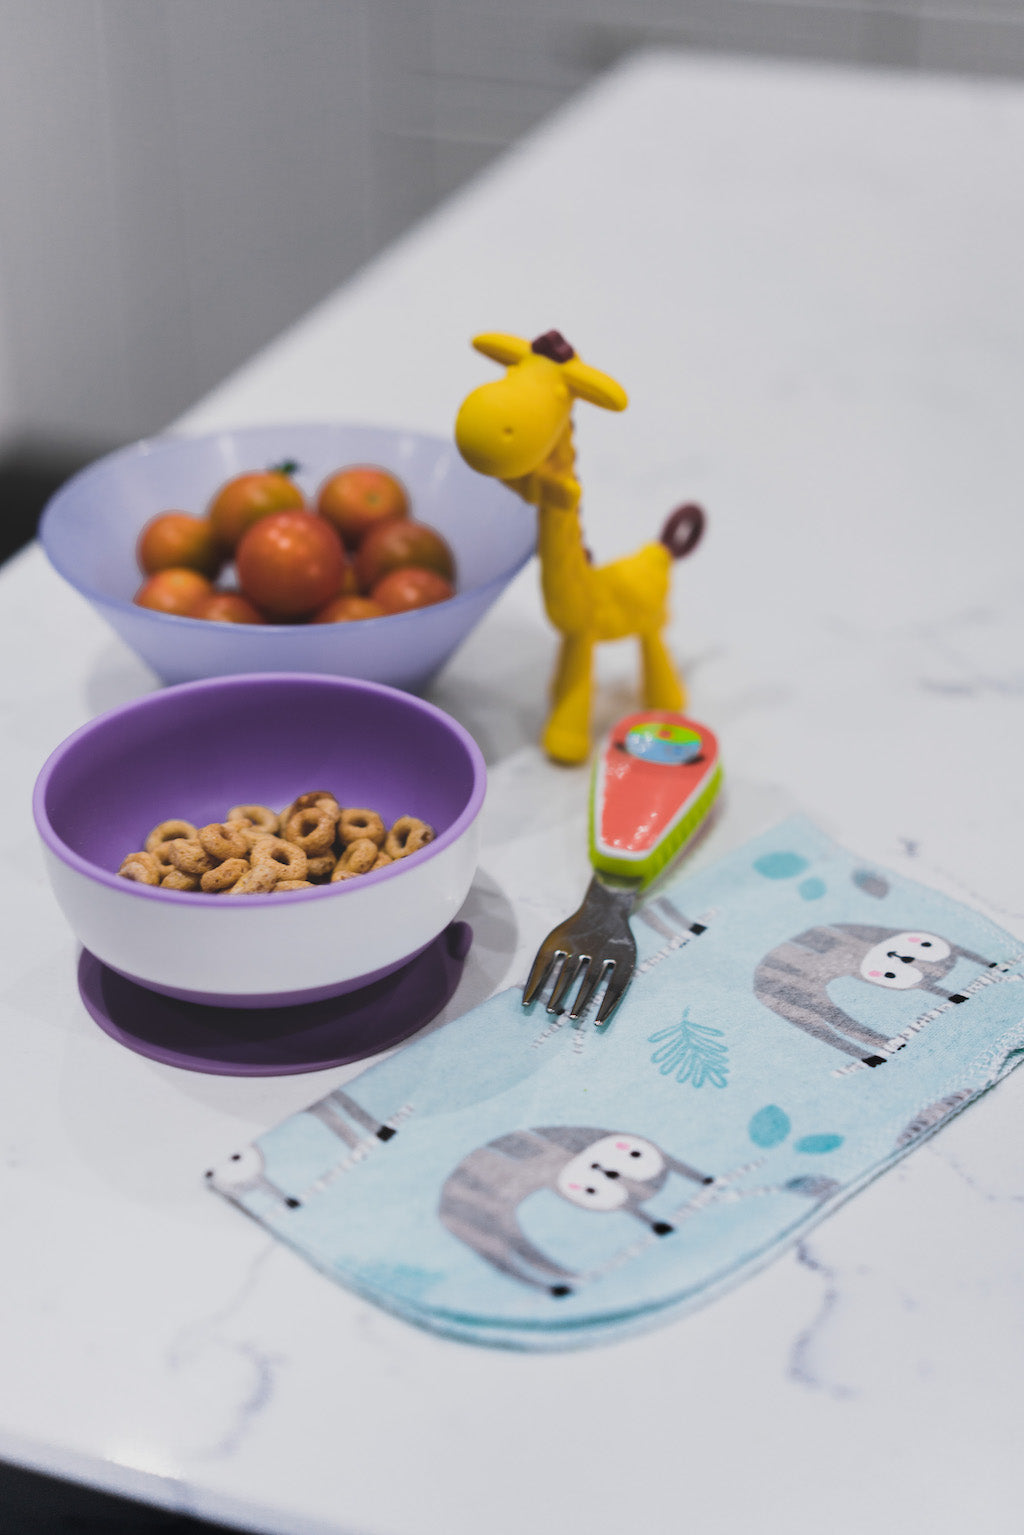 Cheerios and cherry tomatoes in children's bowls with fork, toy giraffe and printed cotton napkin